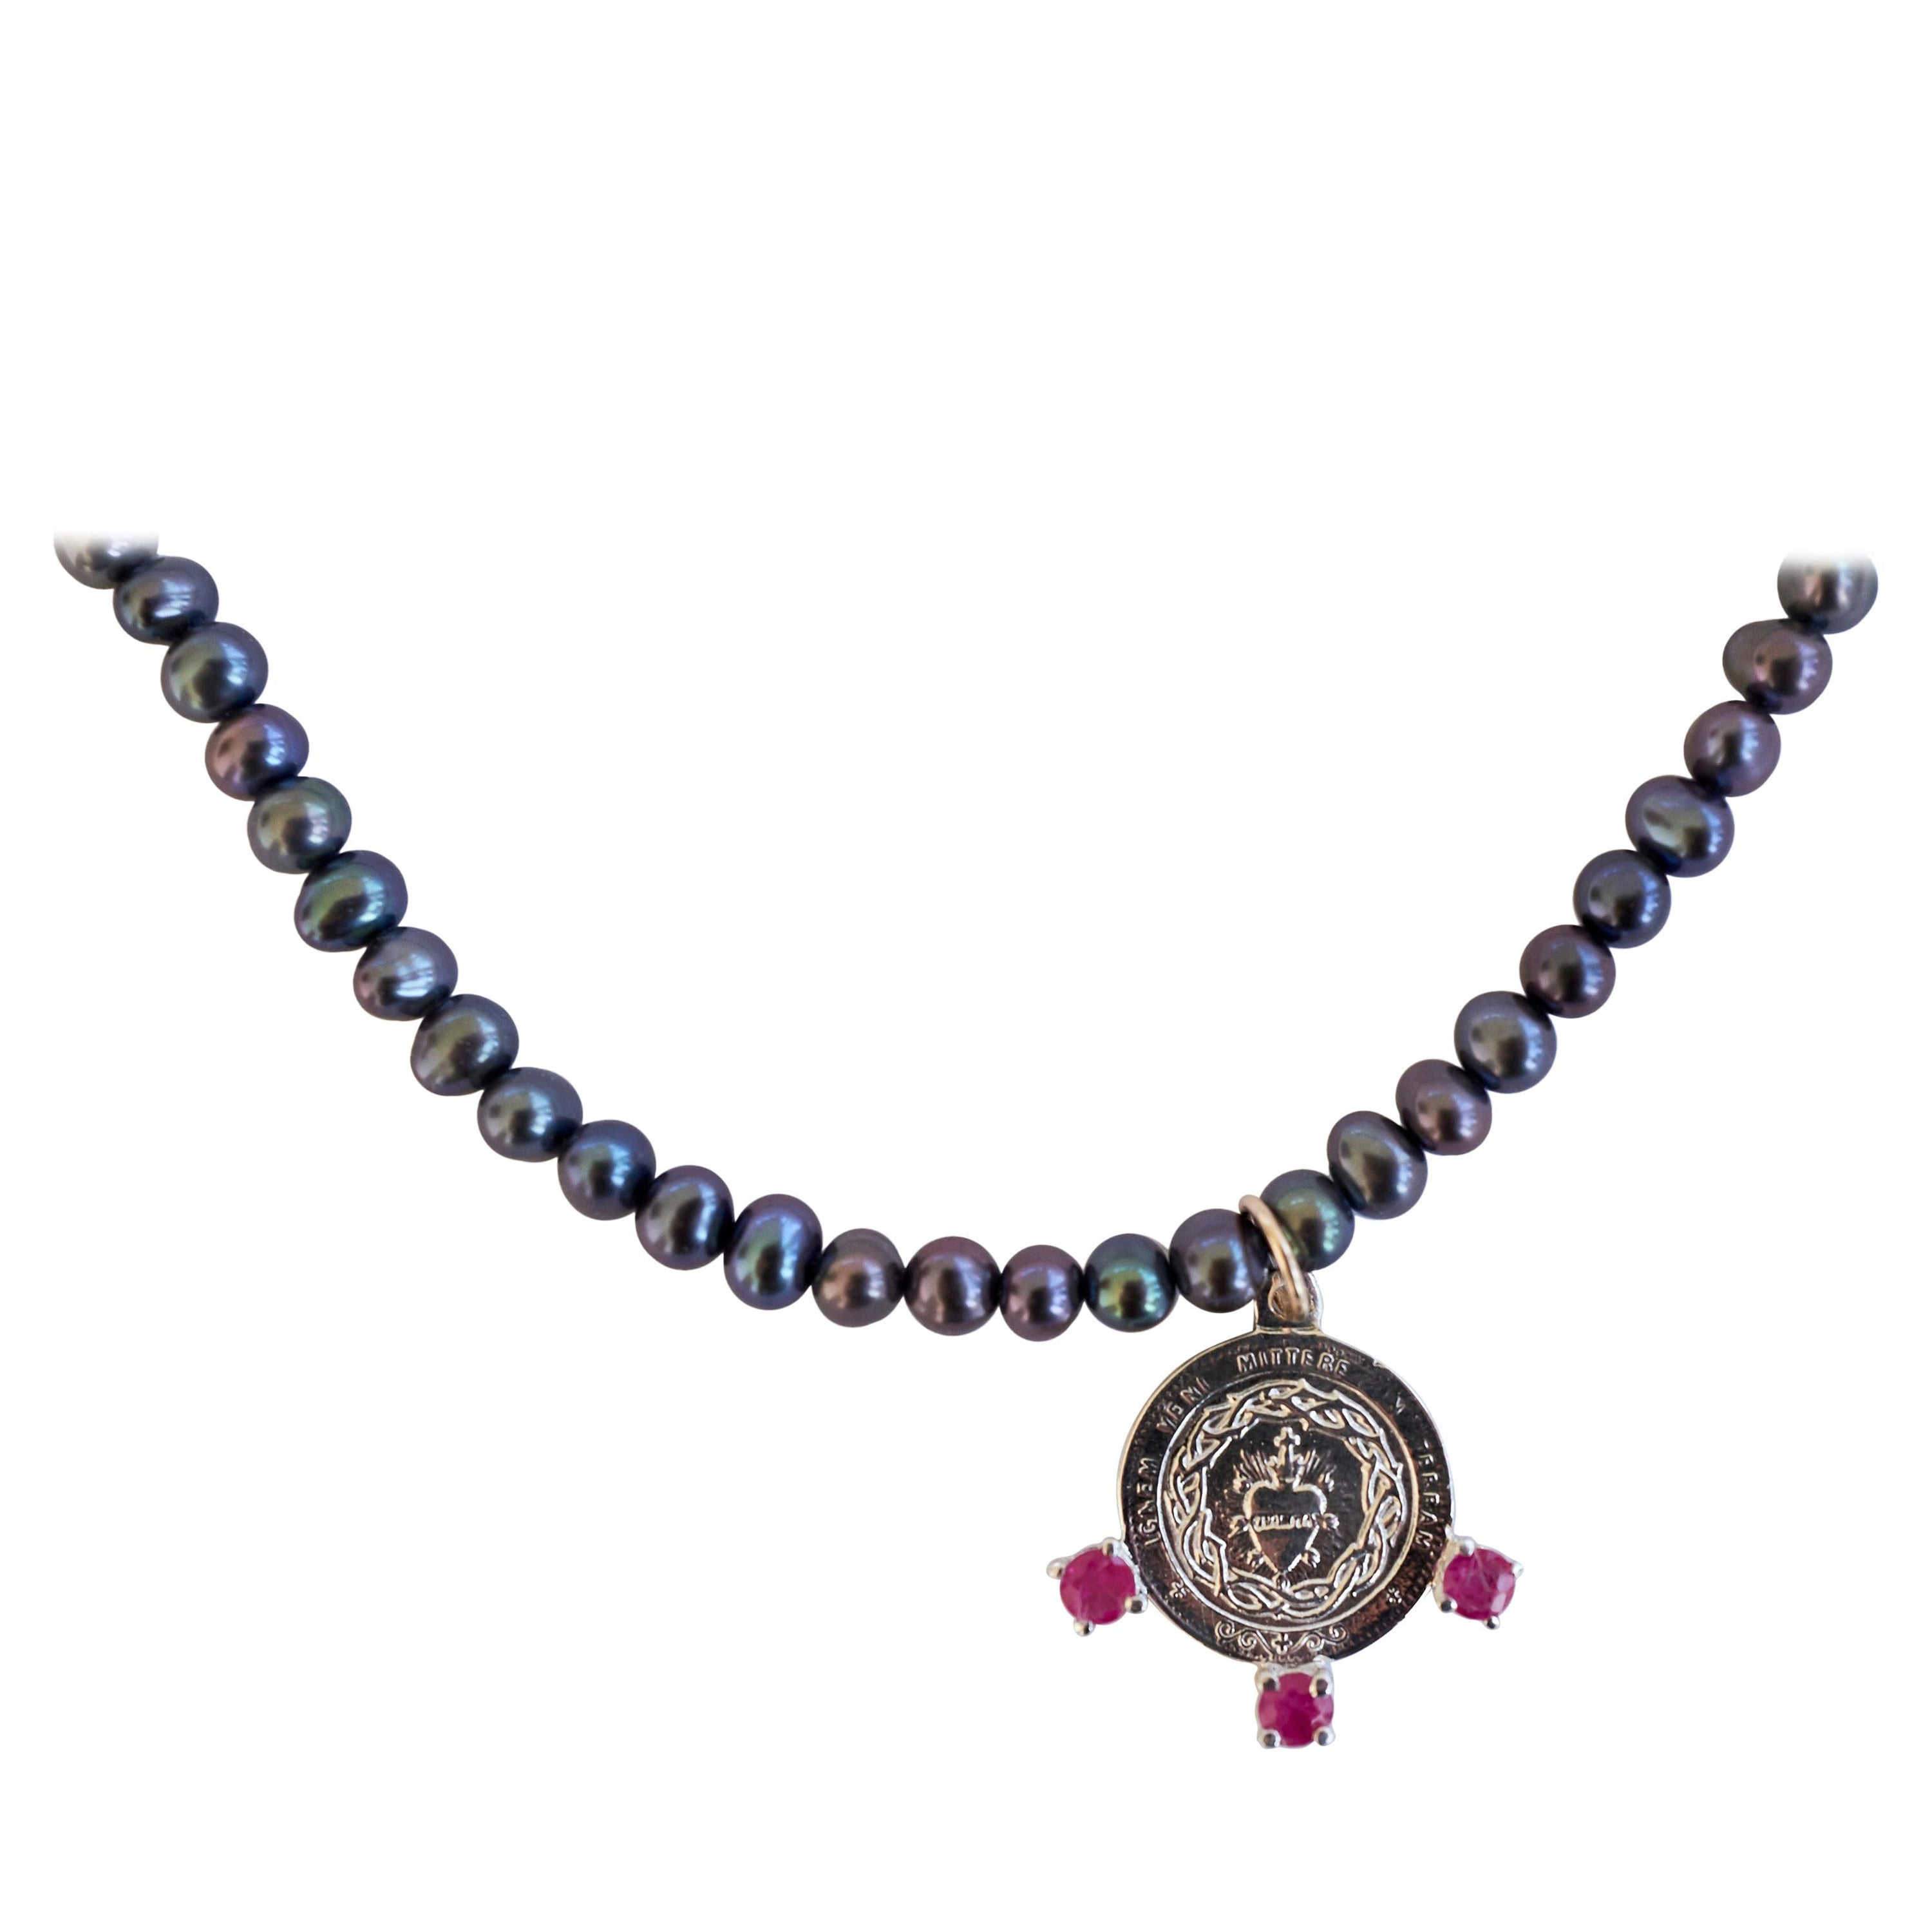 Black Pearl Sacred Heart Medal Pink Tourmaline Silver Chain Necklace J Dauphin For Sale